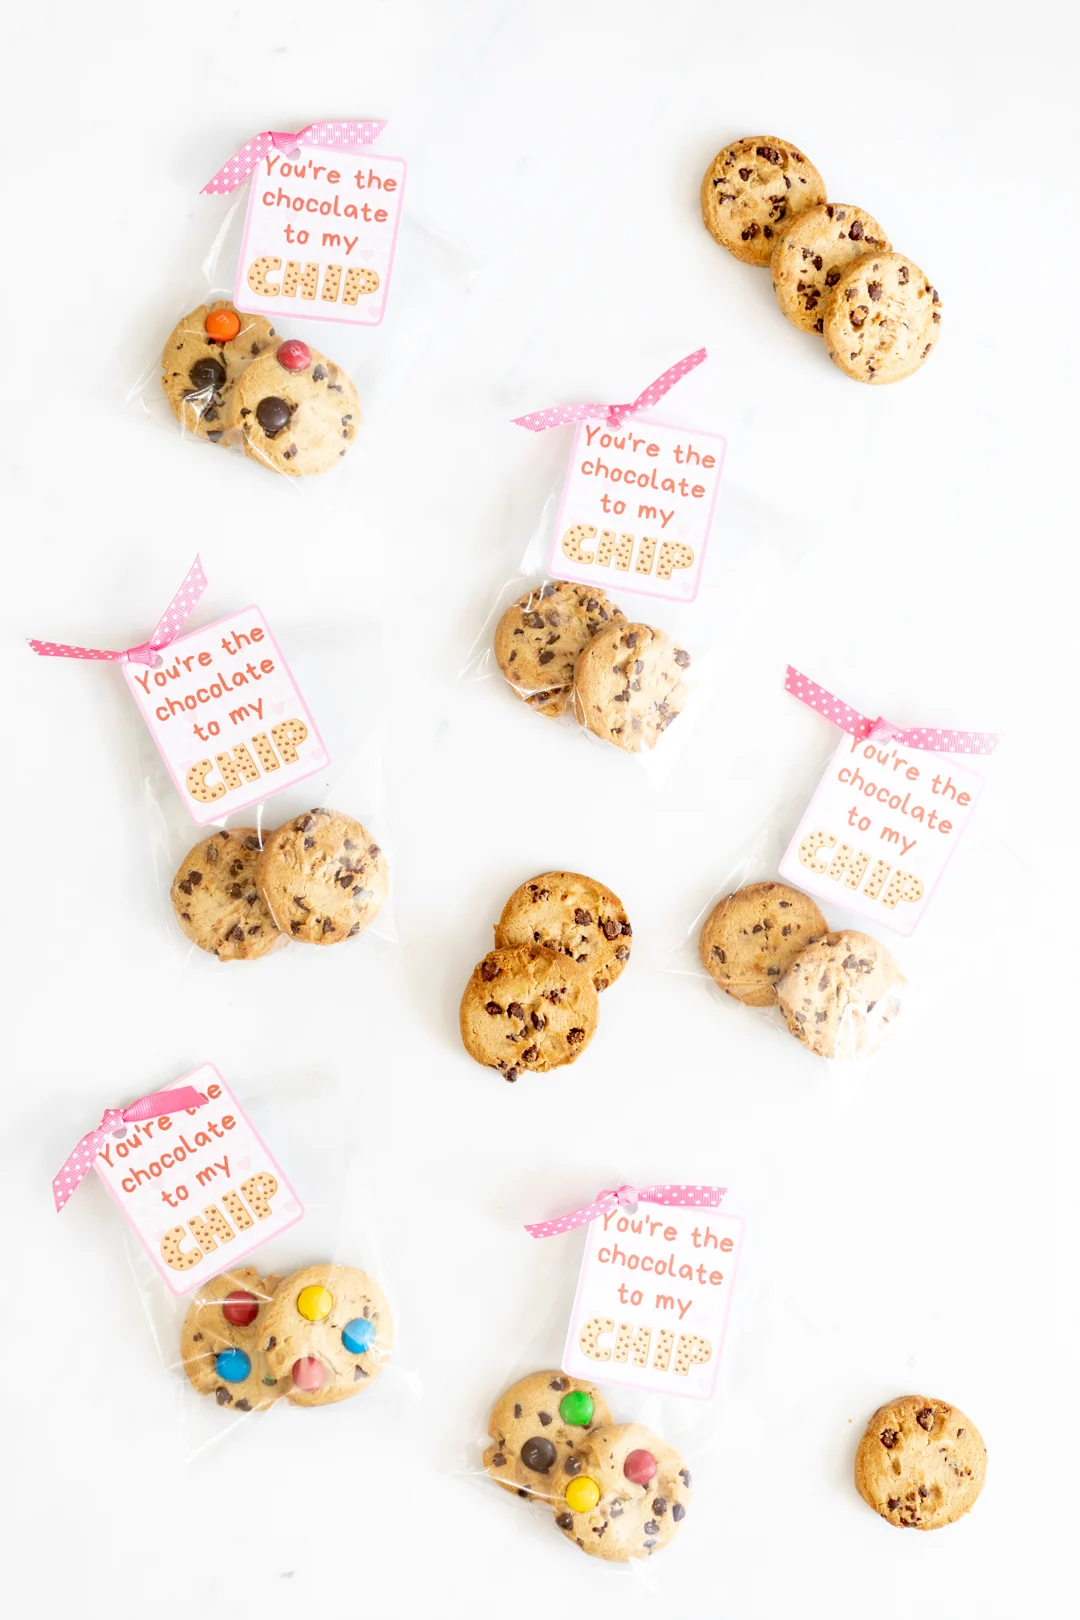 Printable Valentine Cards spread out with ribbons and more cookies